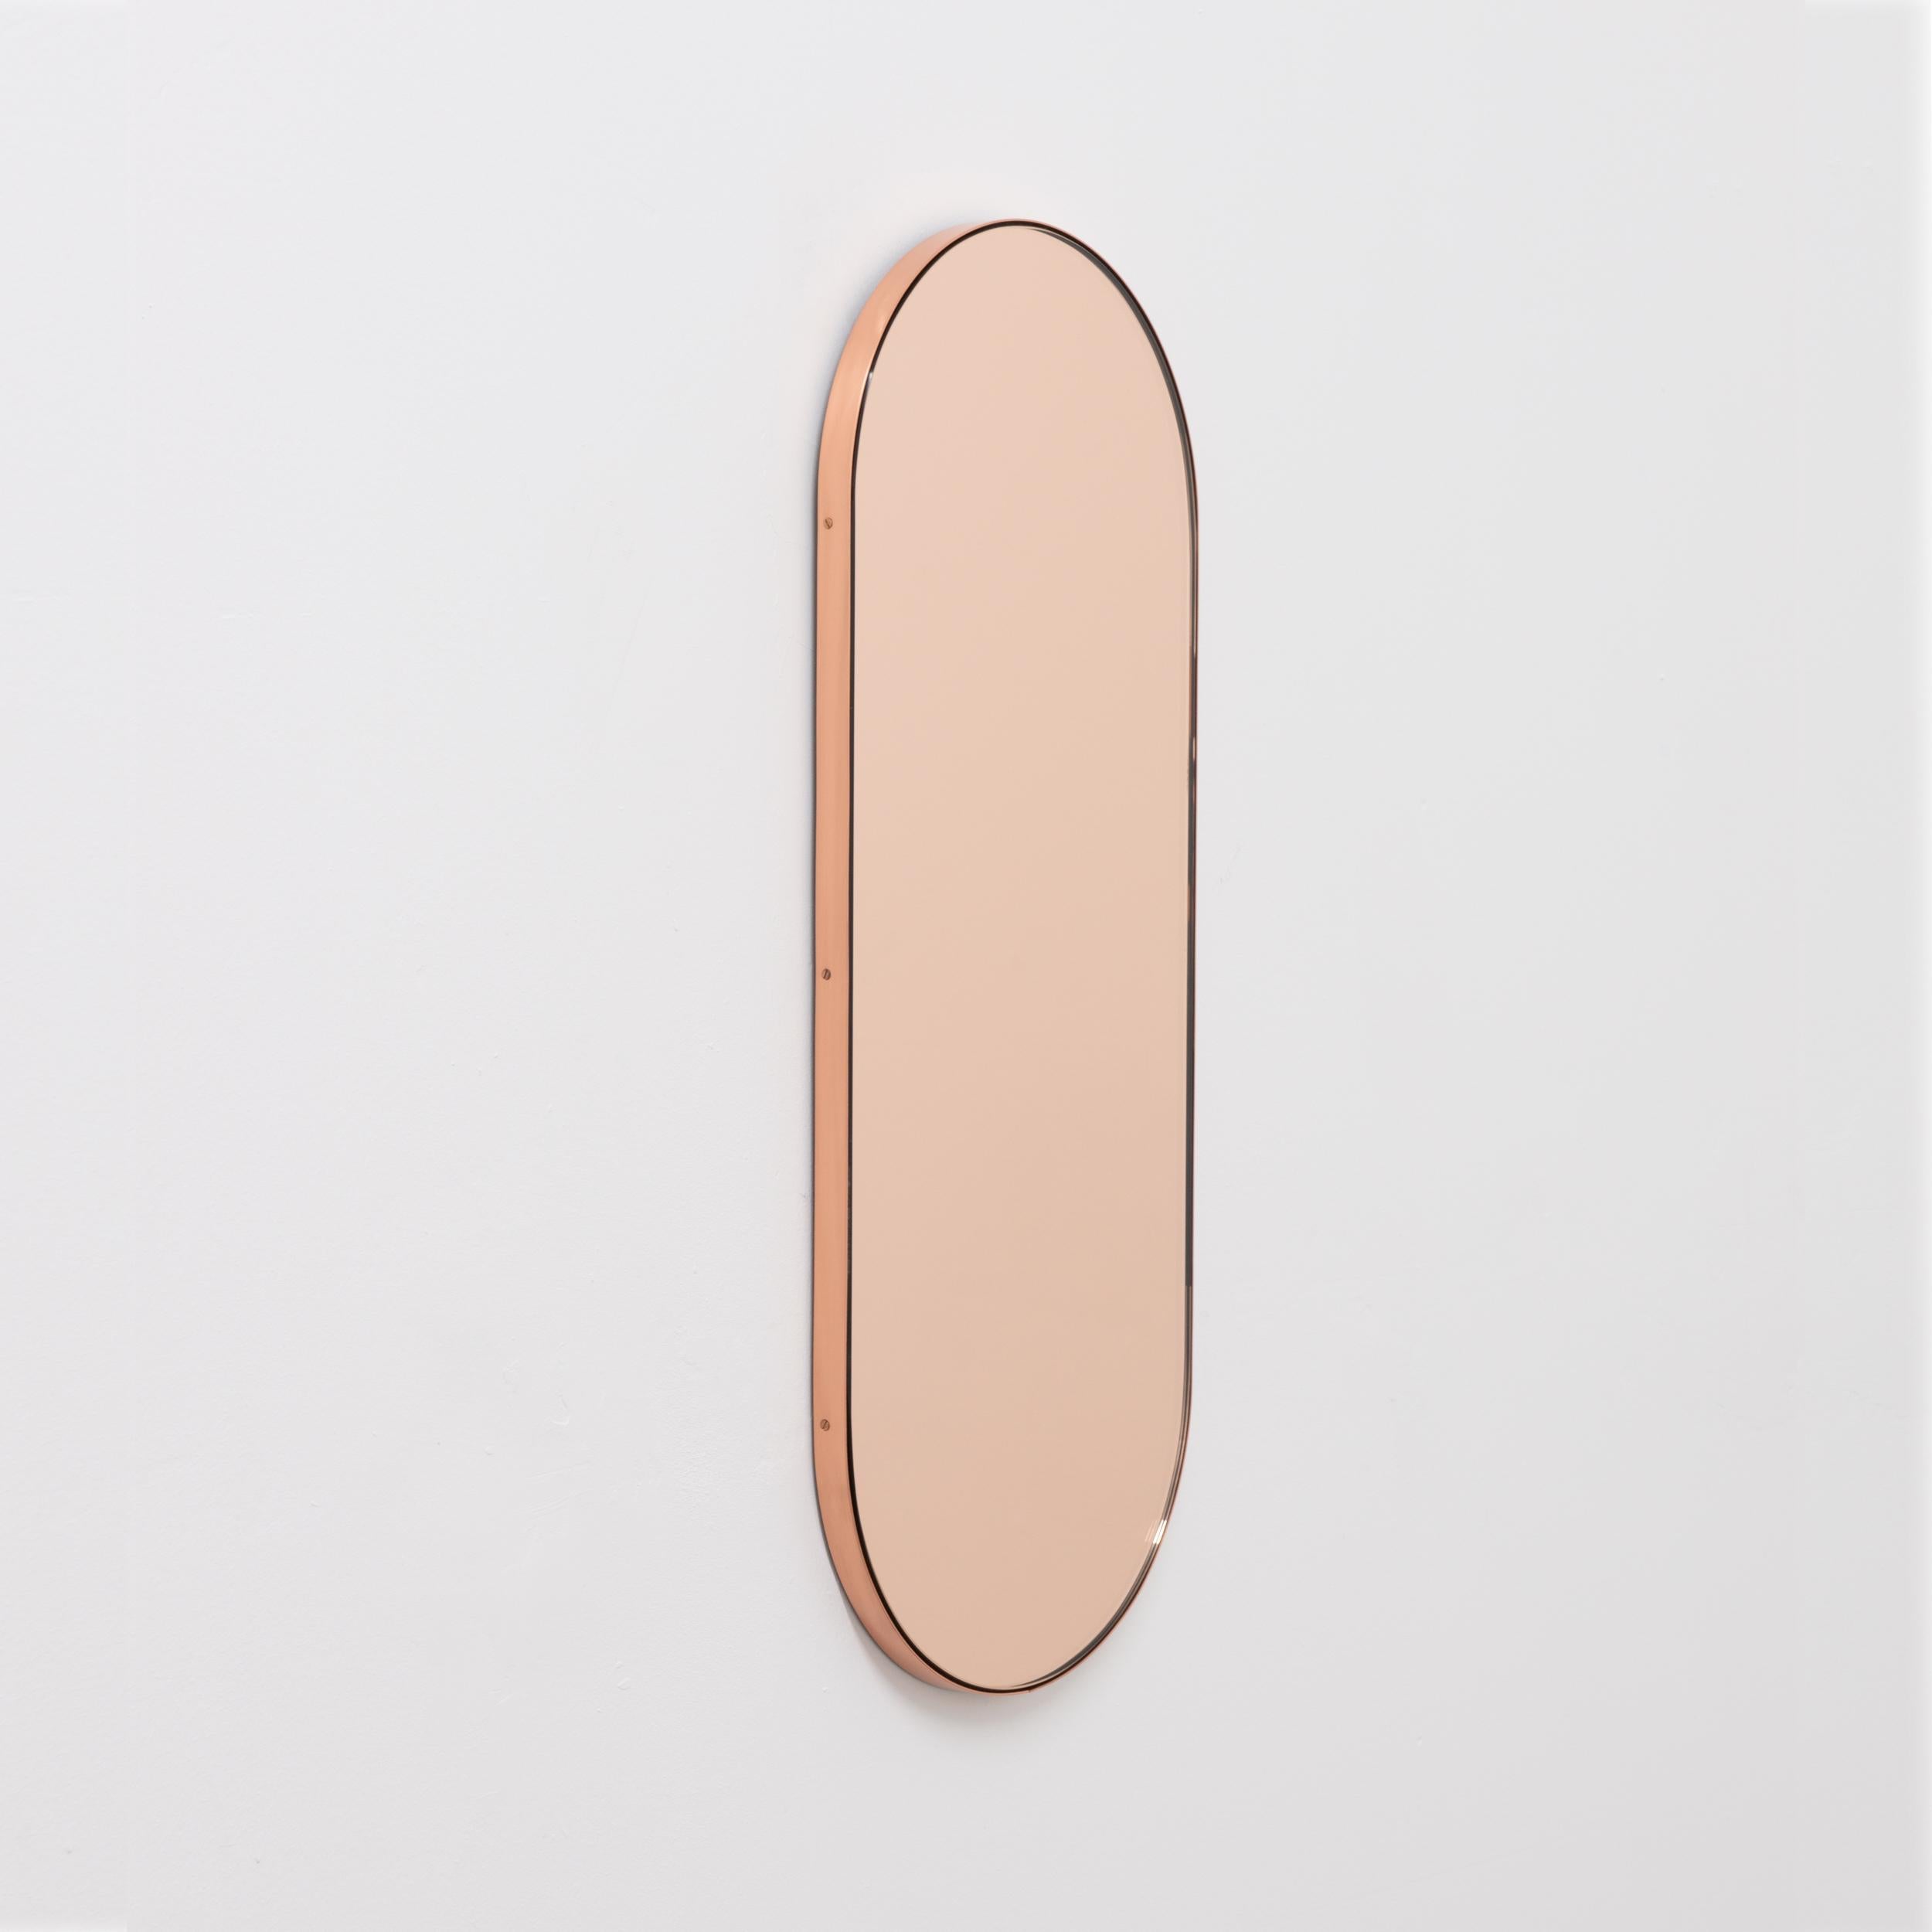 Contemporary Capsula™ capsule / pill shaped rose gold / peach mirror with an elegant copper frame. Designed and handcrafted in London, UK.

Our mirrors are designed with an integrated French cleat (split batten) system that ensures the mirror is